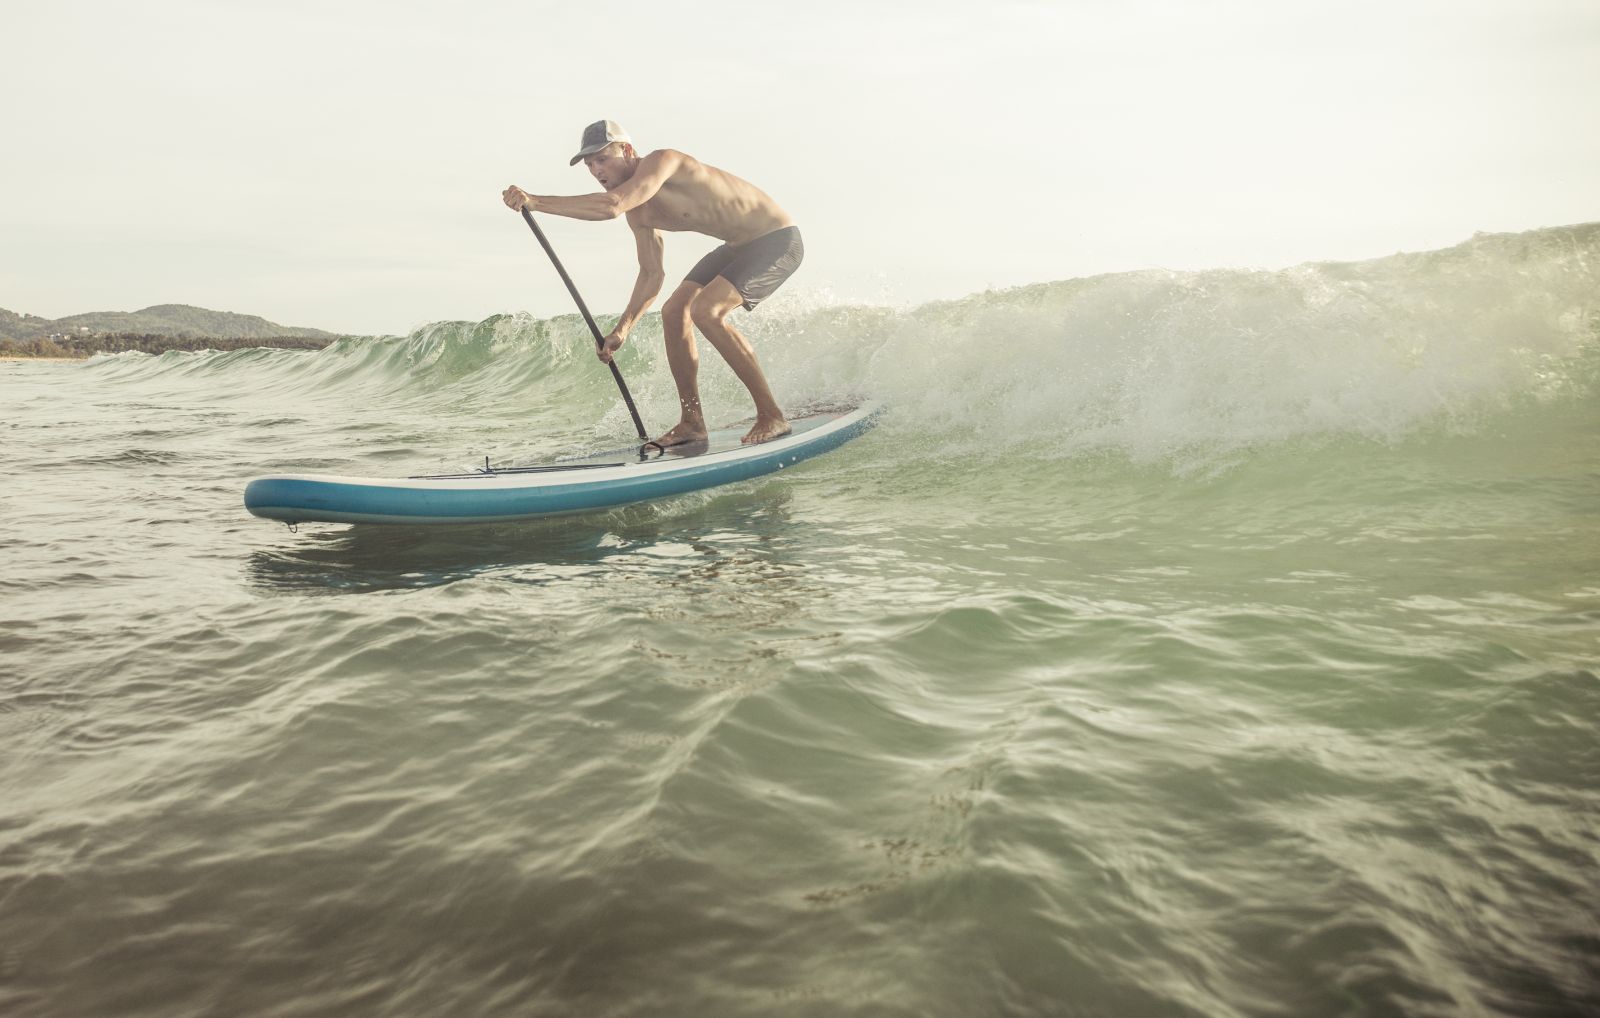 An active male surfer with a paddle balances on a blue paddleboard, skillfully navigating a wave, demonstrating a dynamic moment of water sports adventure.